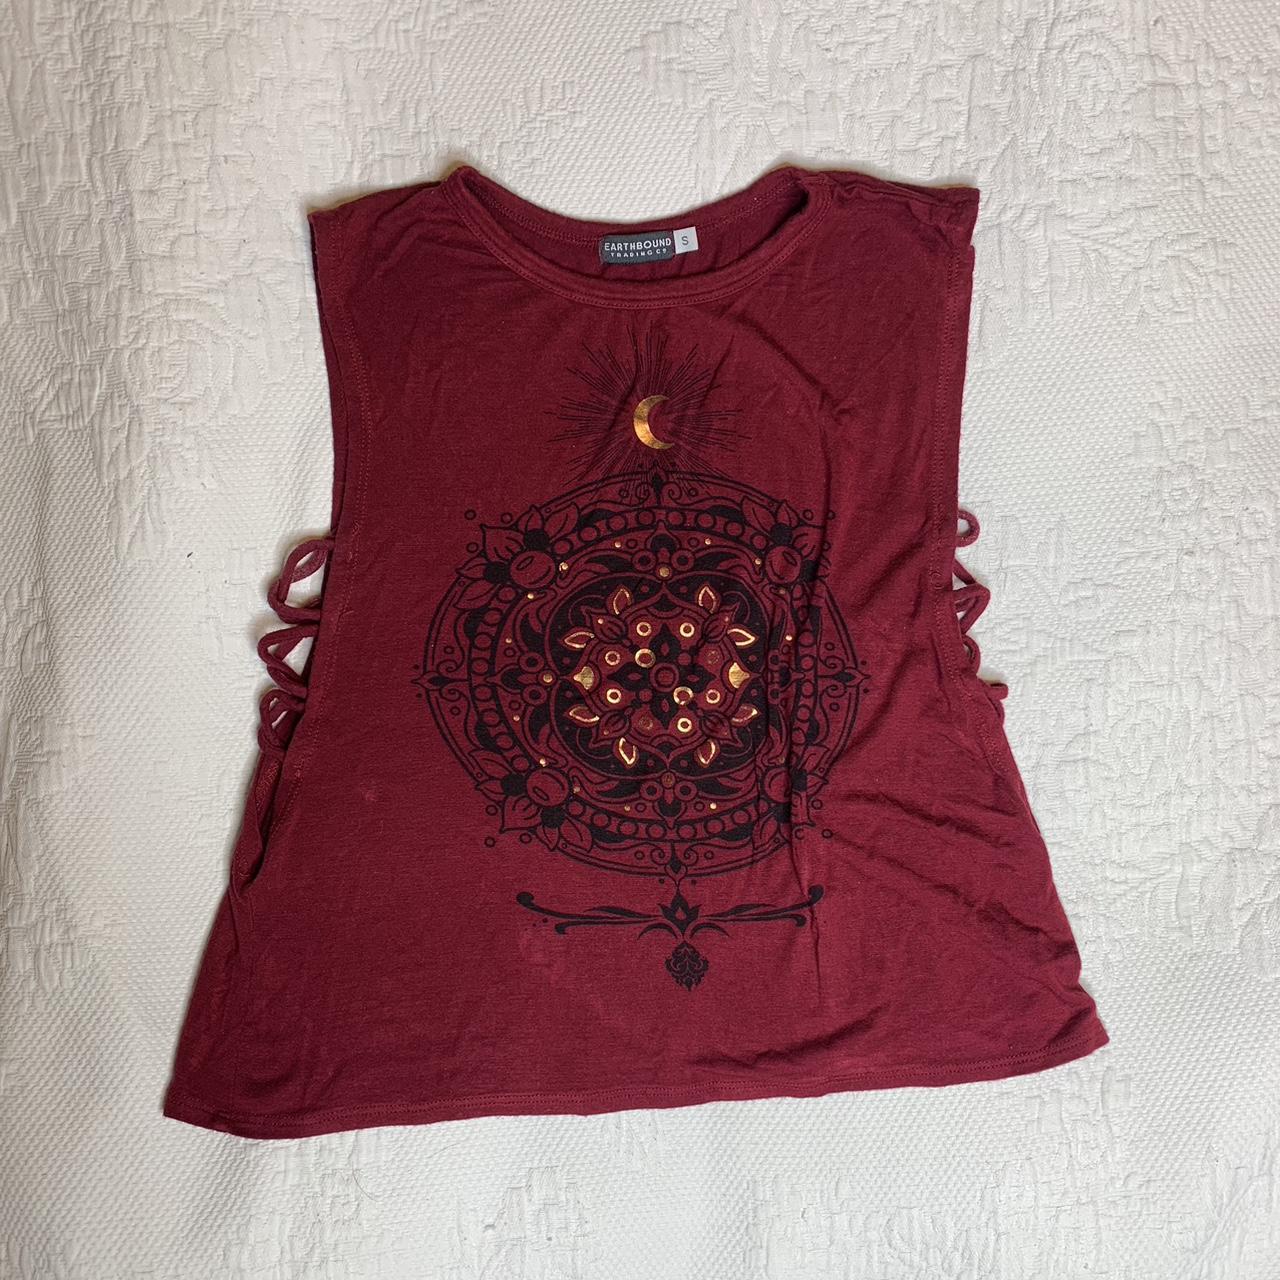 Women's Red and Gold Vest | Depop